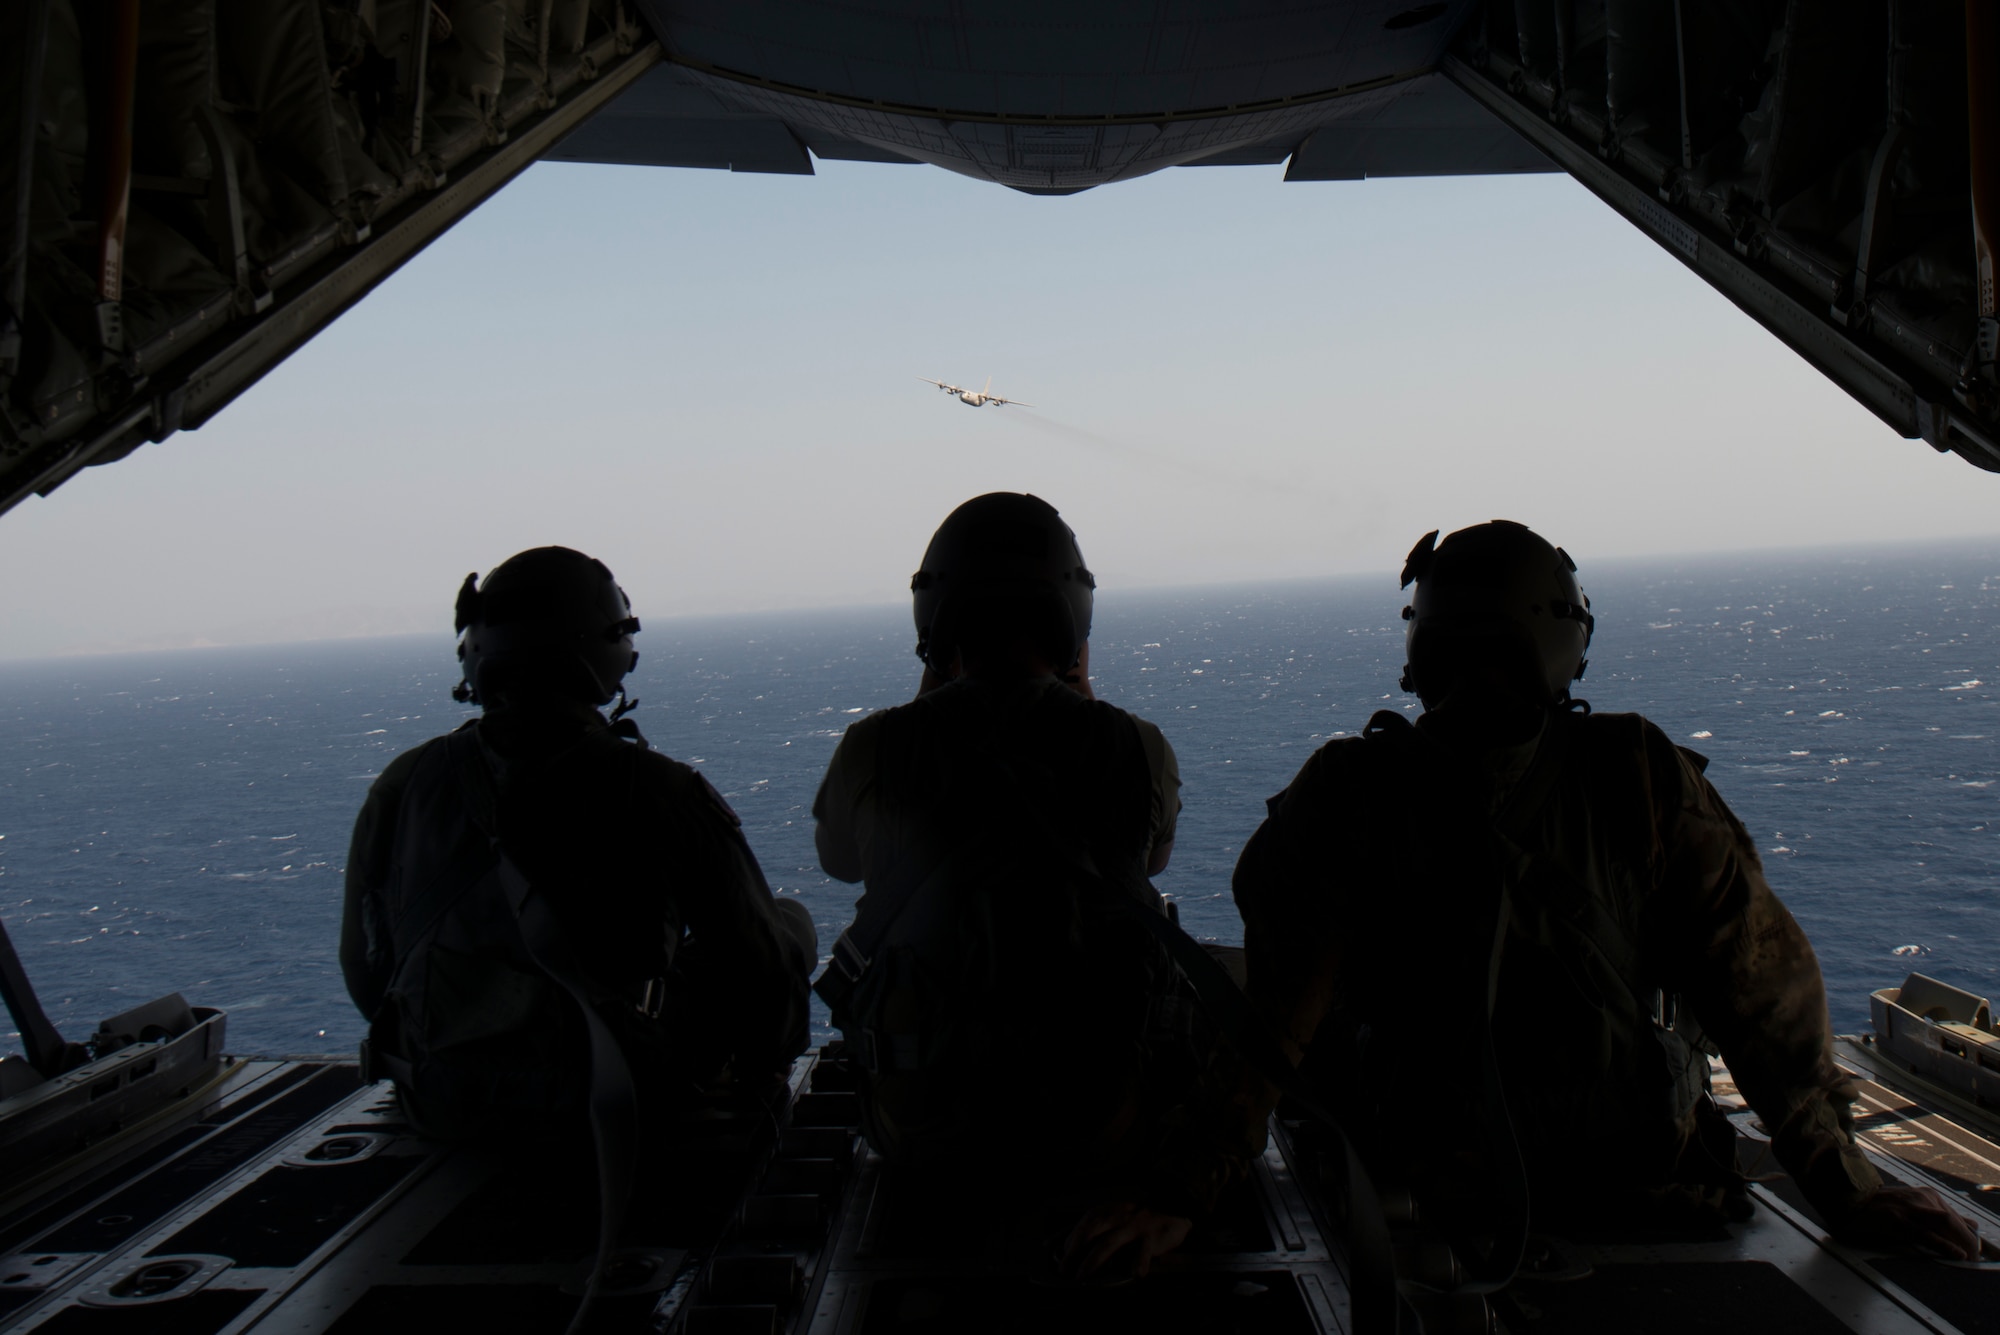 Airmen watch a plane fly over while on a plane.